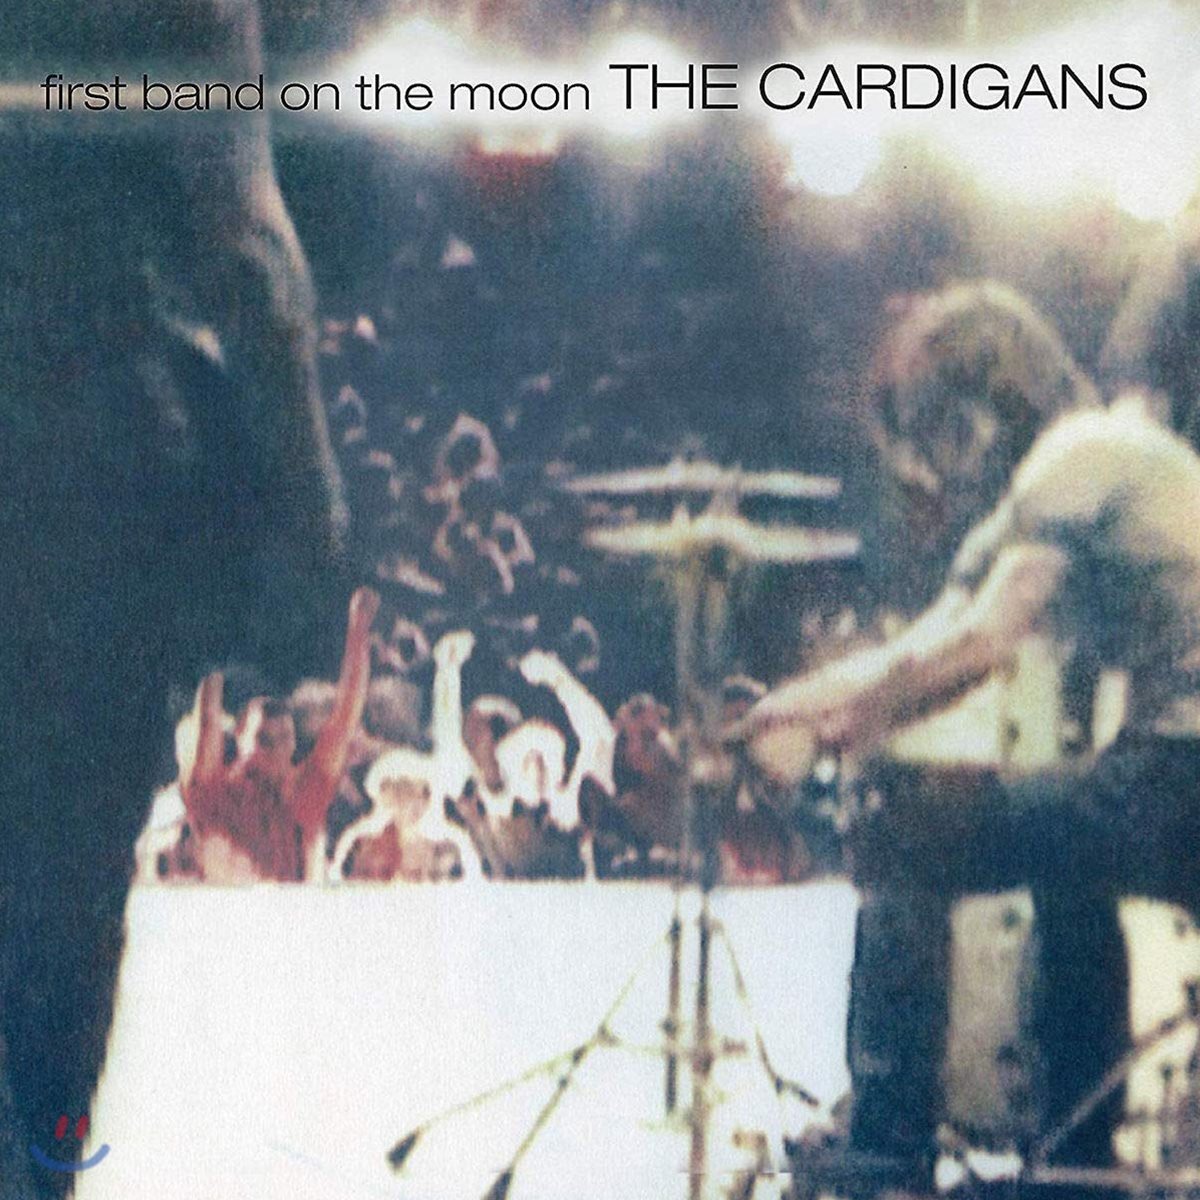 Cardigans - First Band On The Moon 카디건스 정규 3집 [LP]